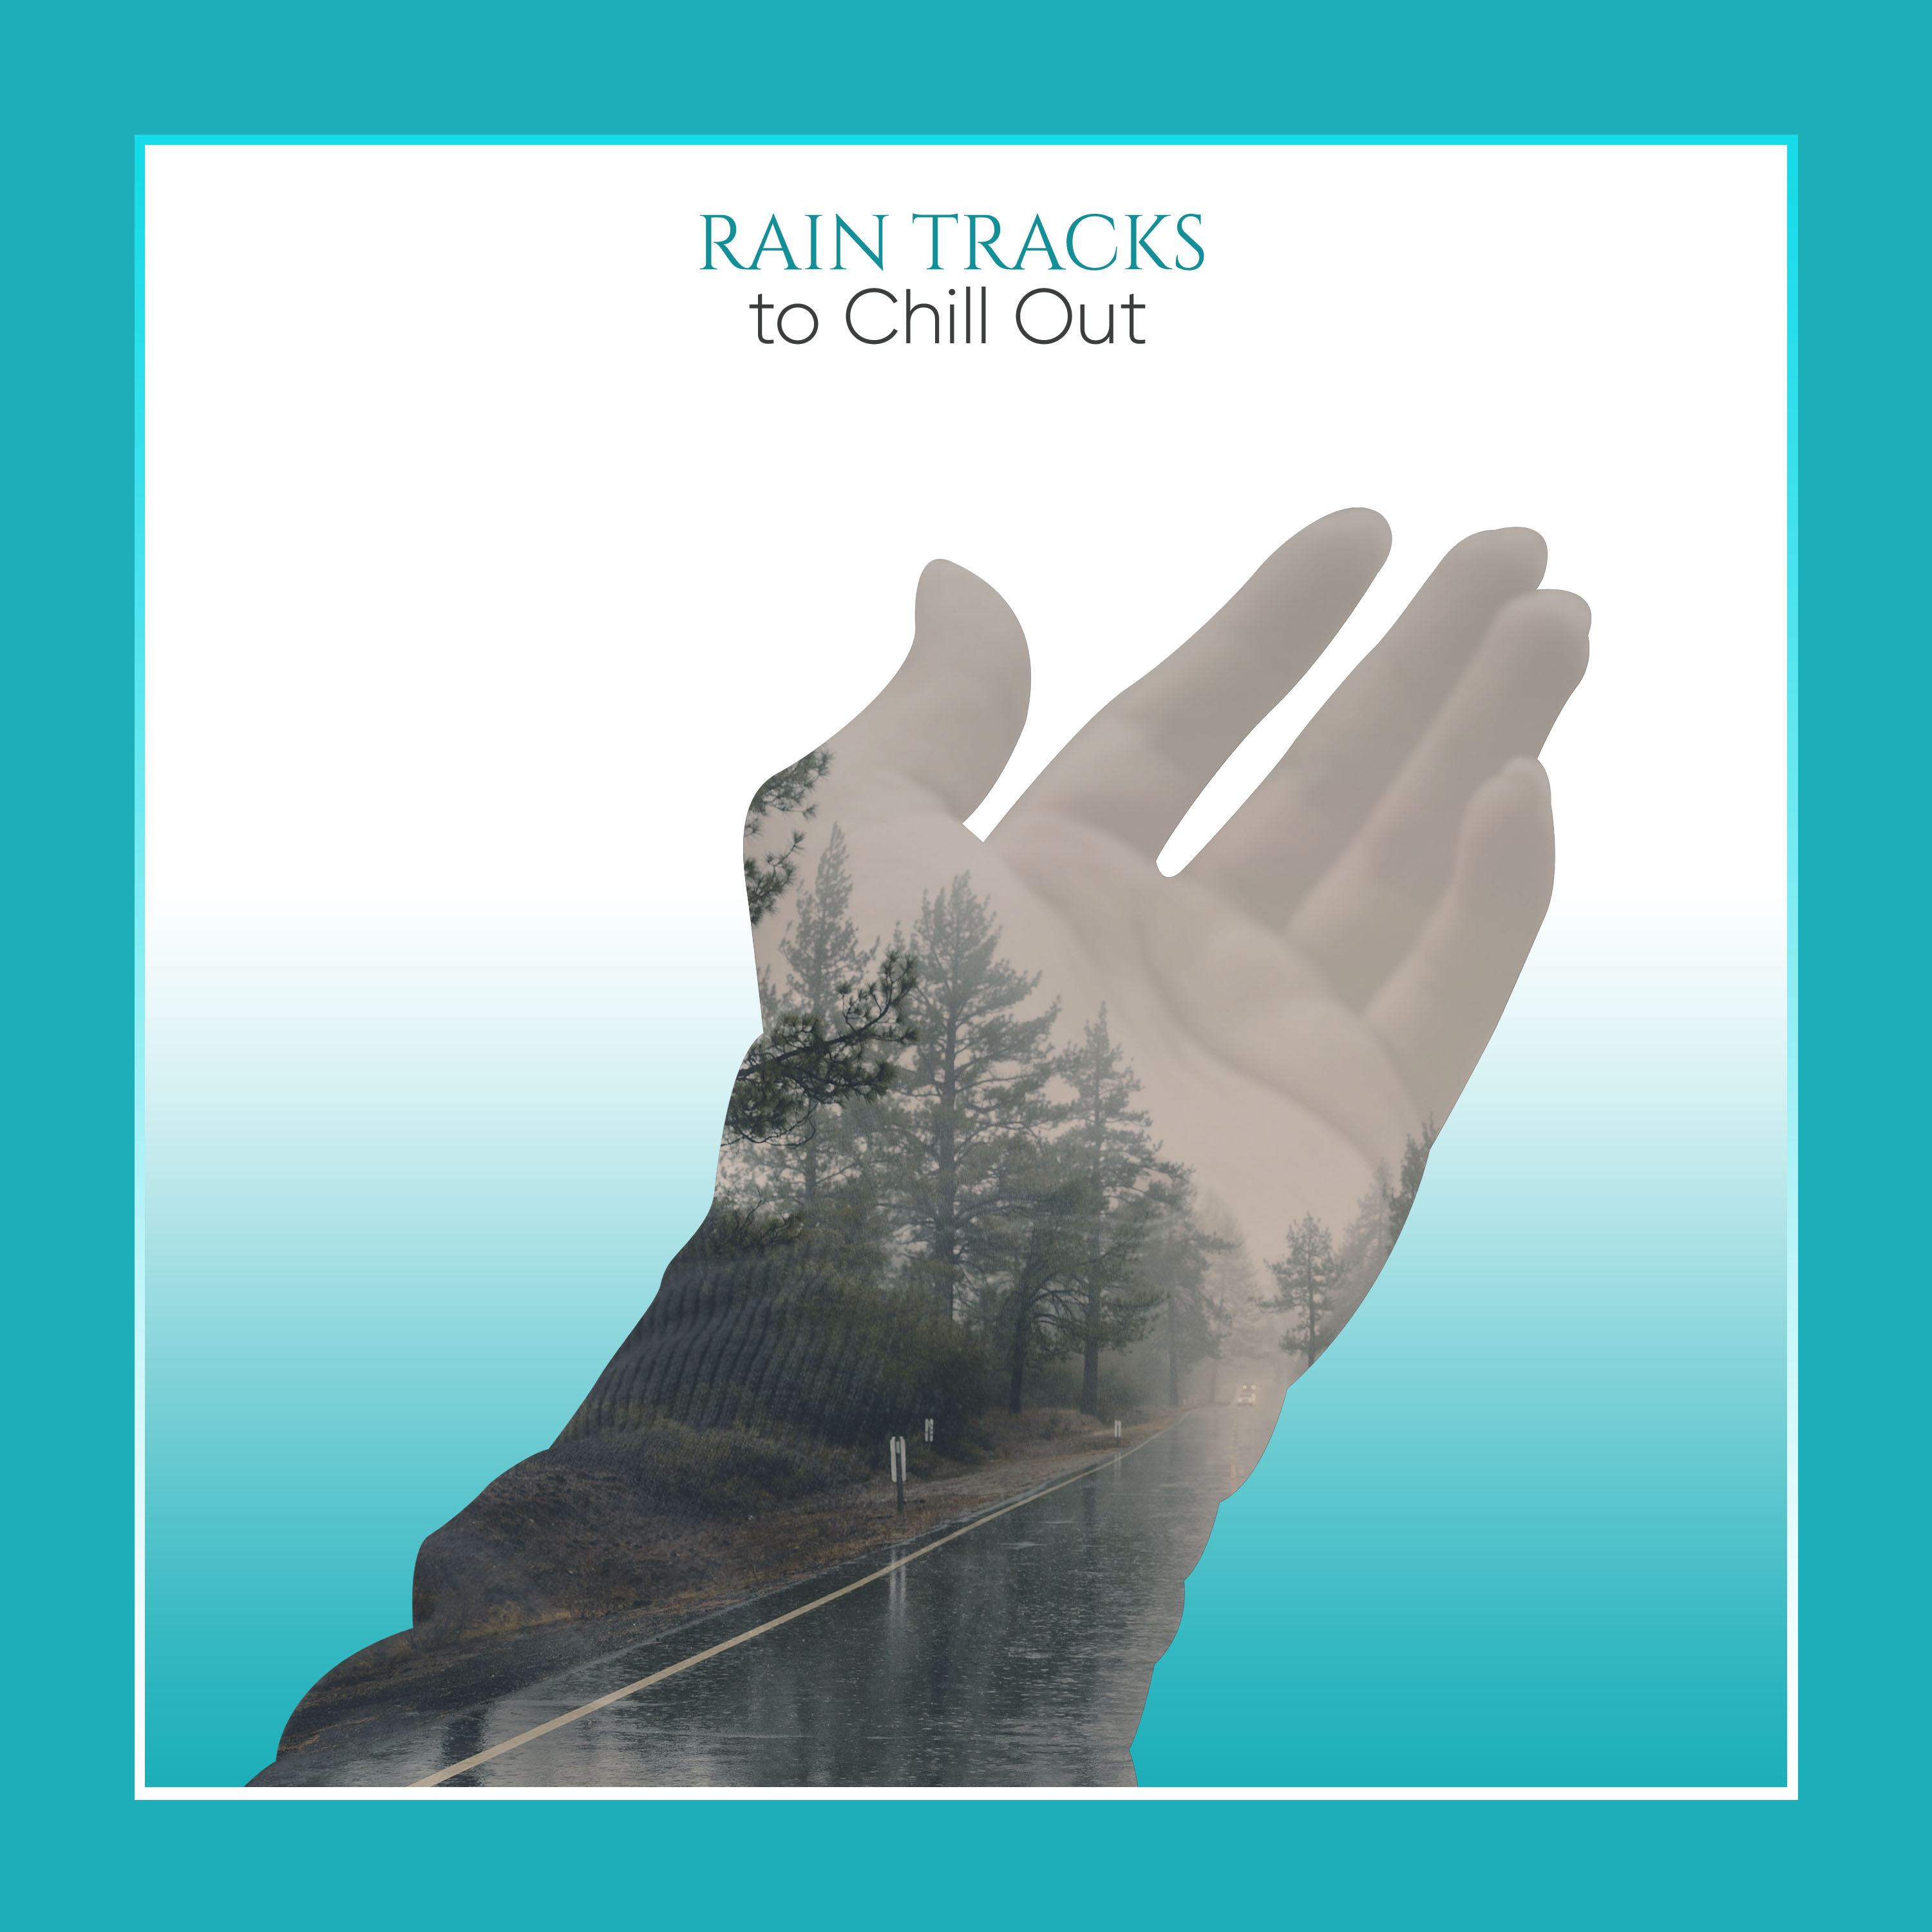 11 RainTracks to Chill Out